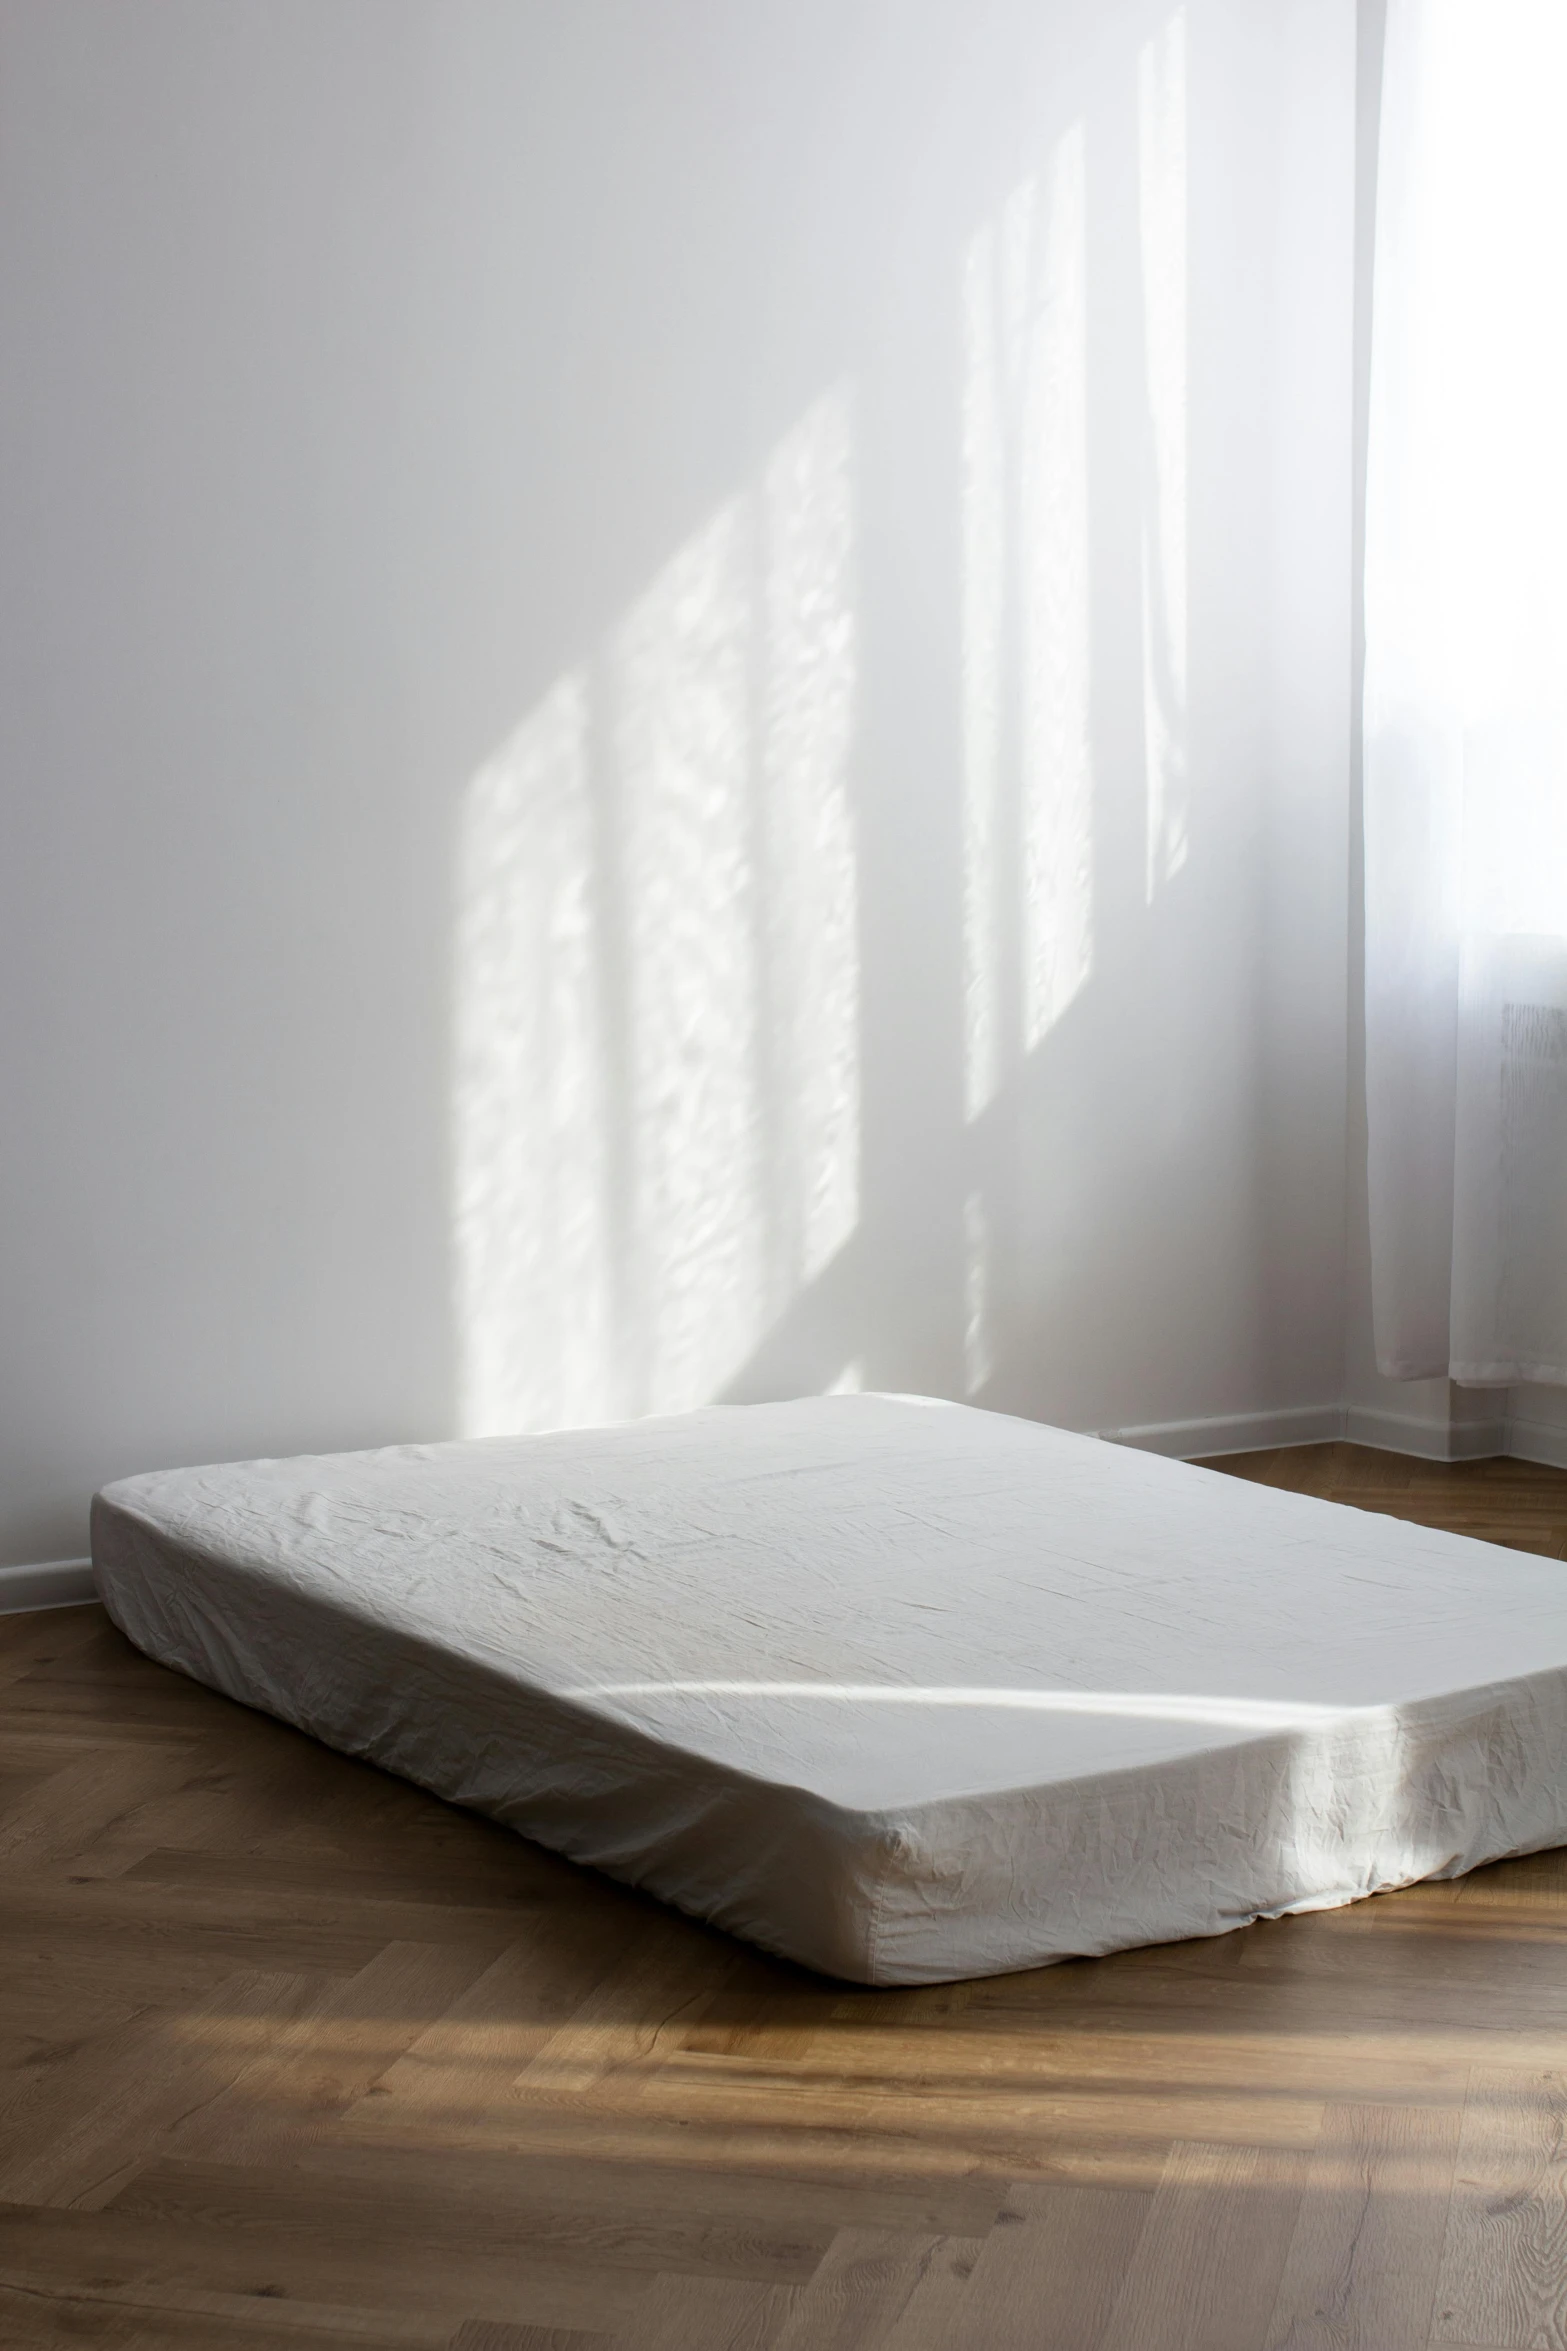 a mattress laying in a room on a wooden floor